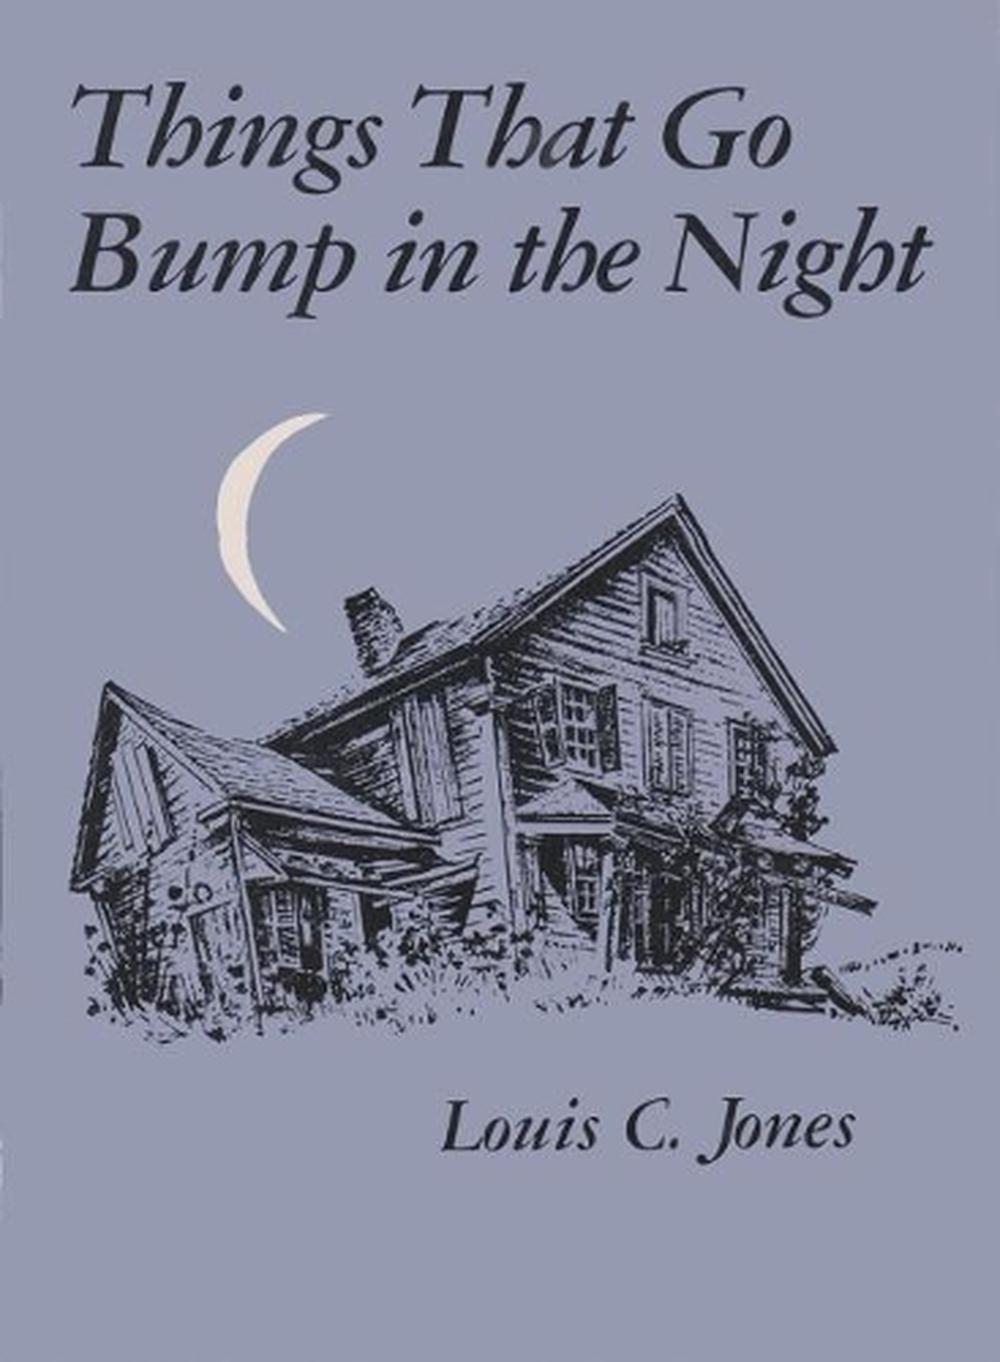 Things That Go Bump in the Night by Louis C. Jones (English) Paperback - Things That Go Bump In The Night Midsomer